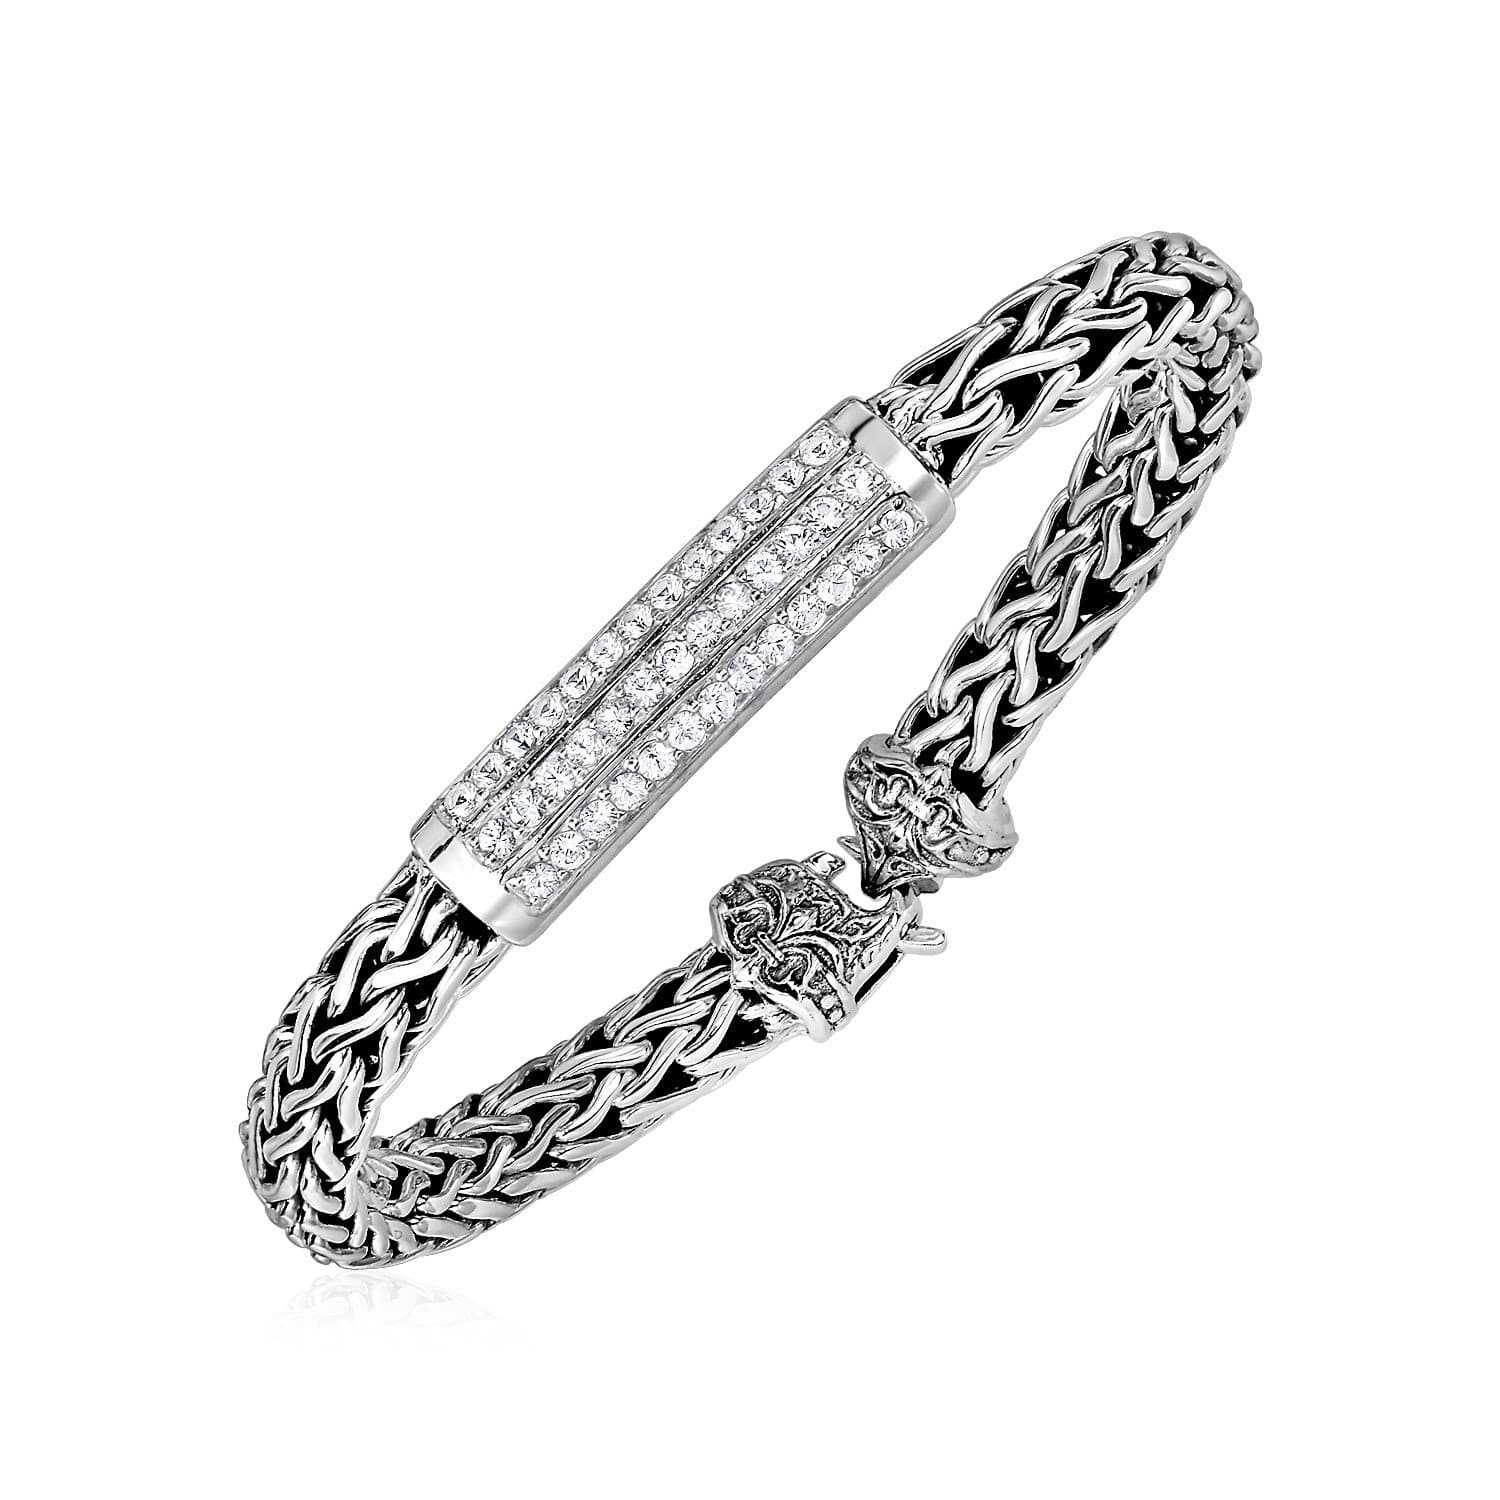 Wide Woven Rope Bracelet with White Sapphire Accents in Sterling Silver